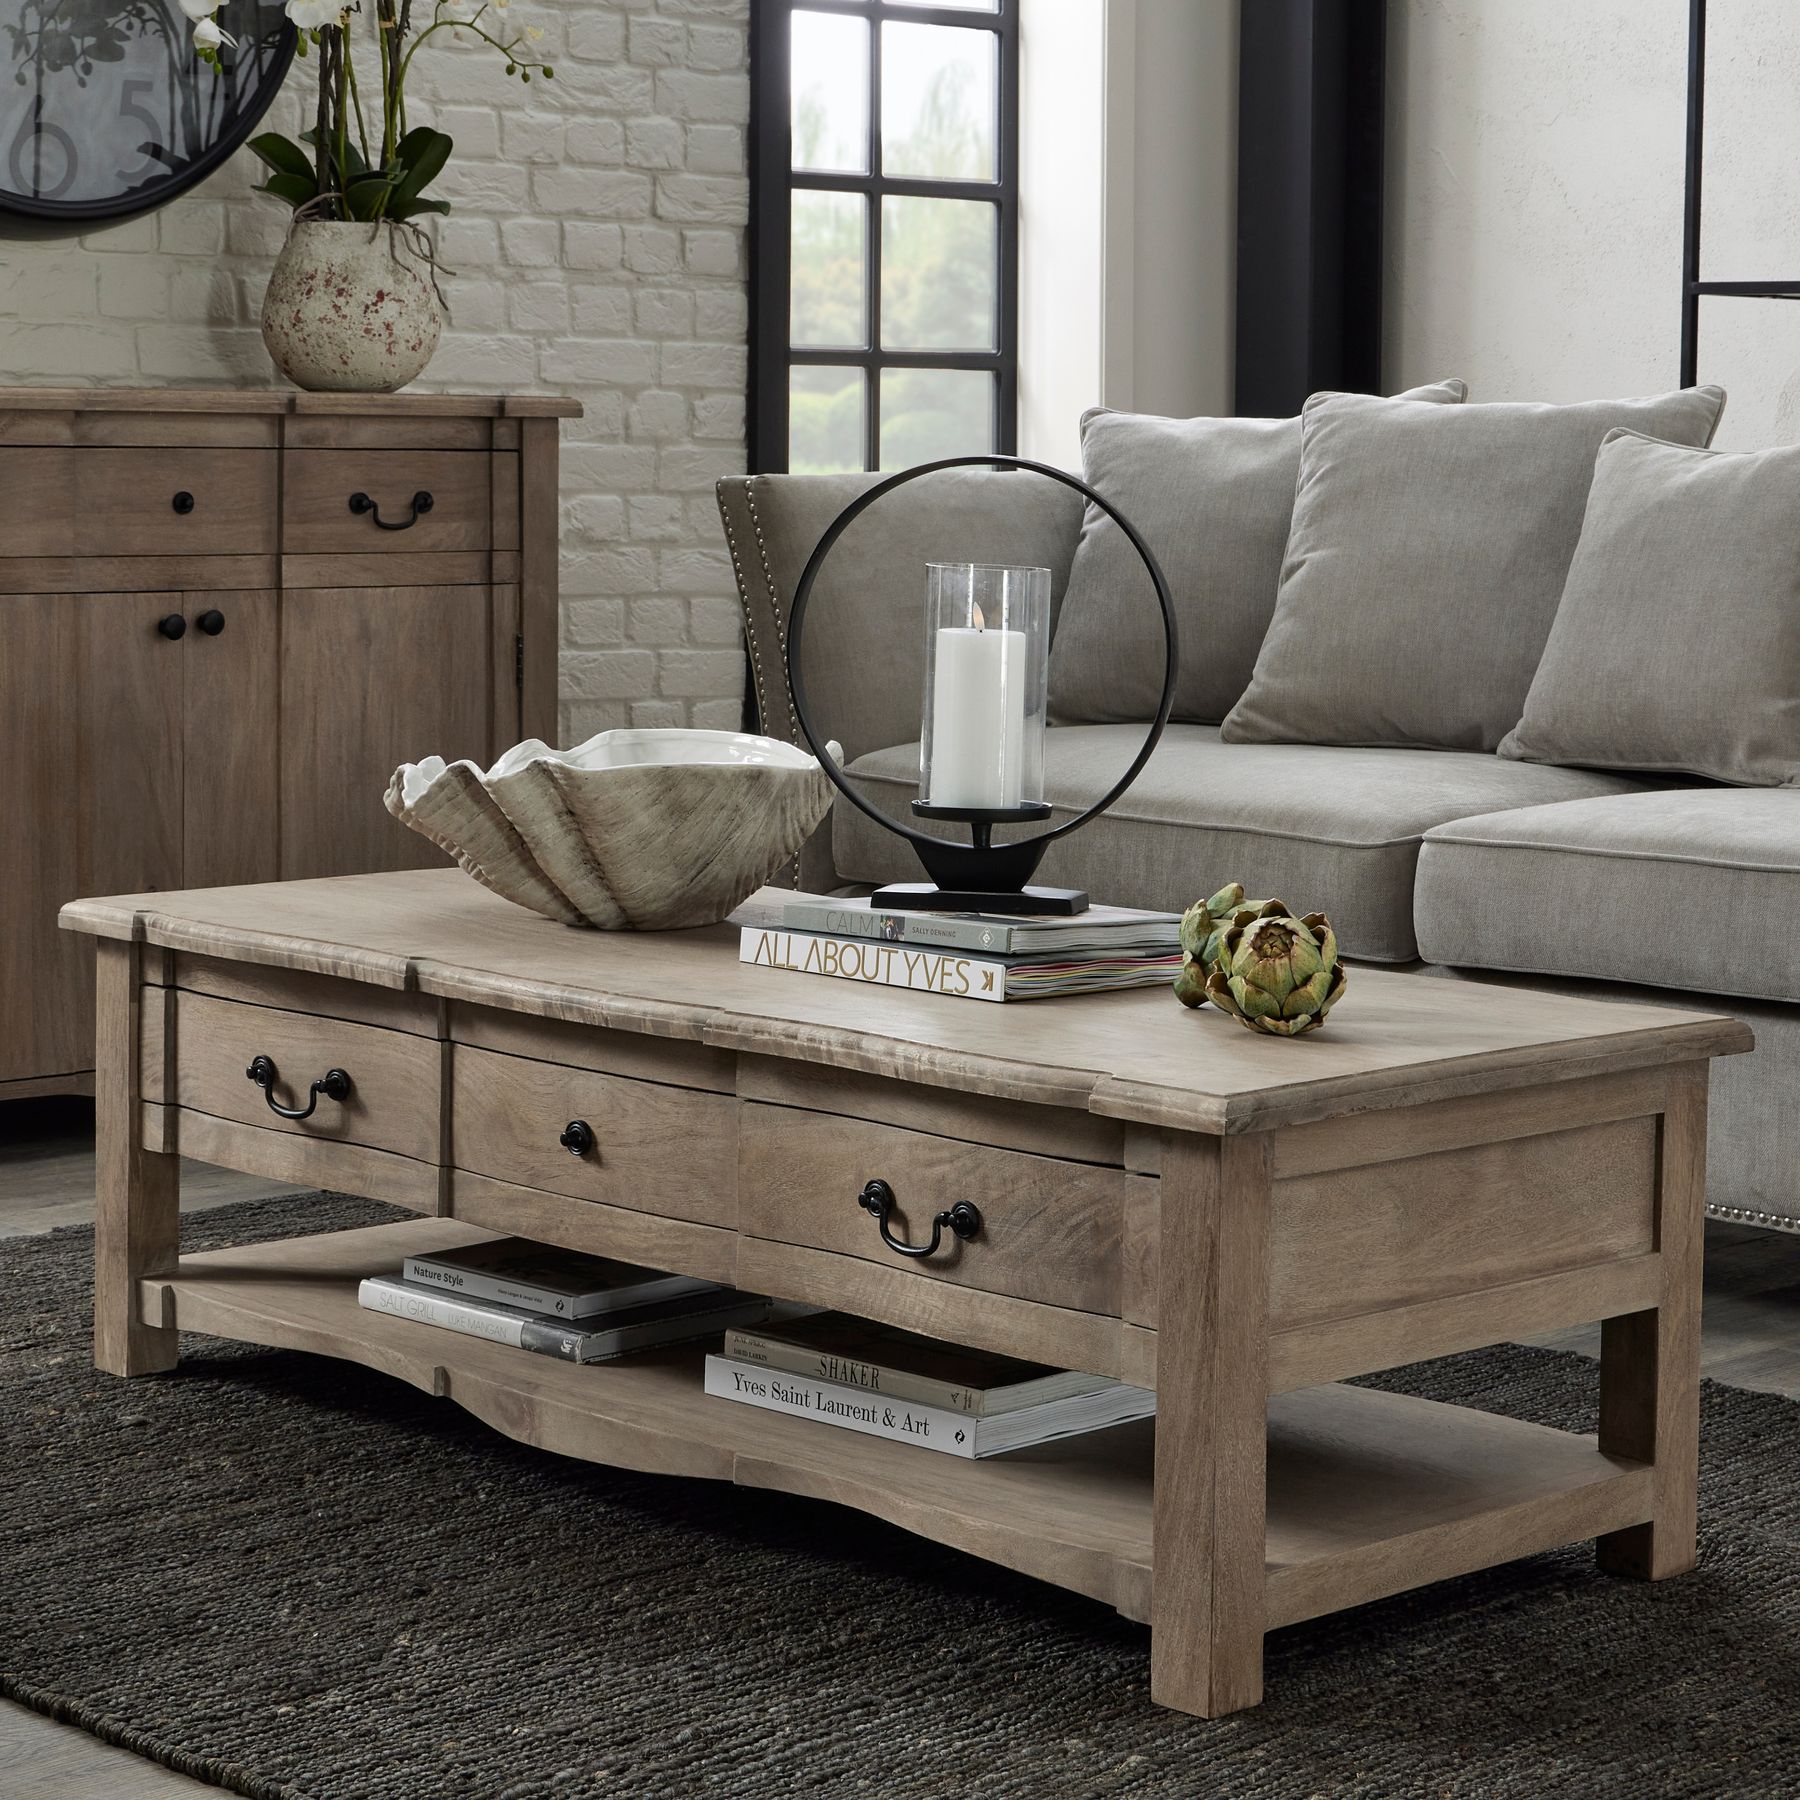 Copgrove Collection 2 Drawer Coffee Table - Image 5